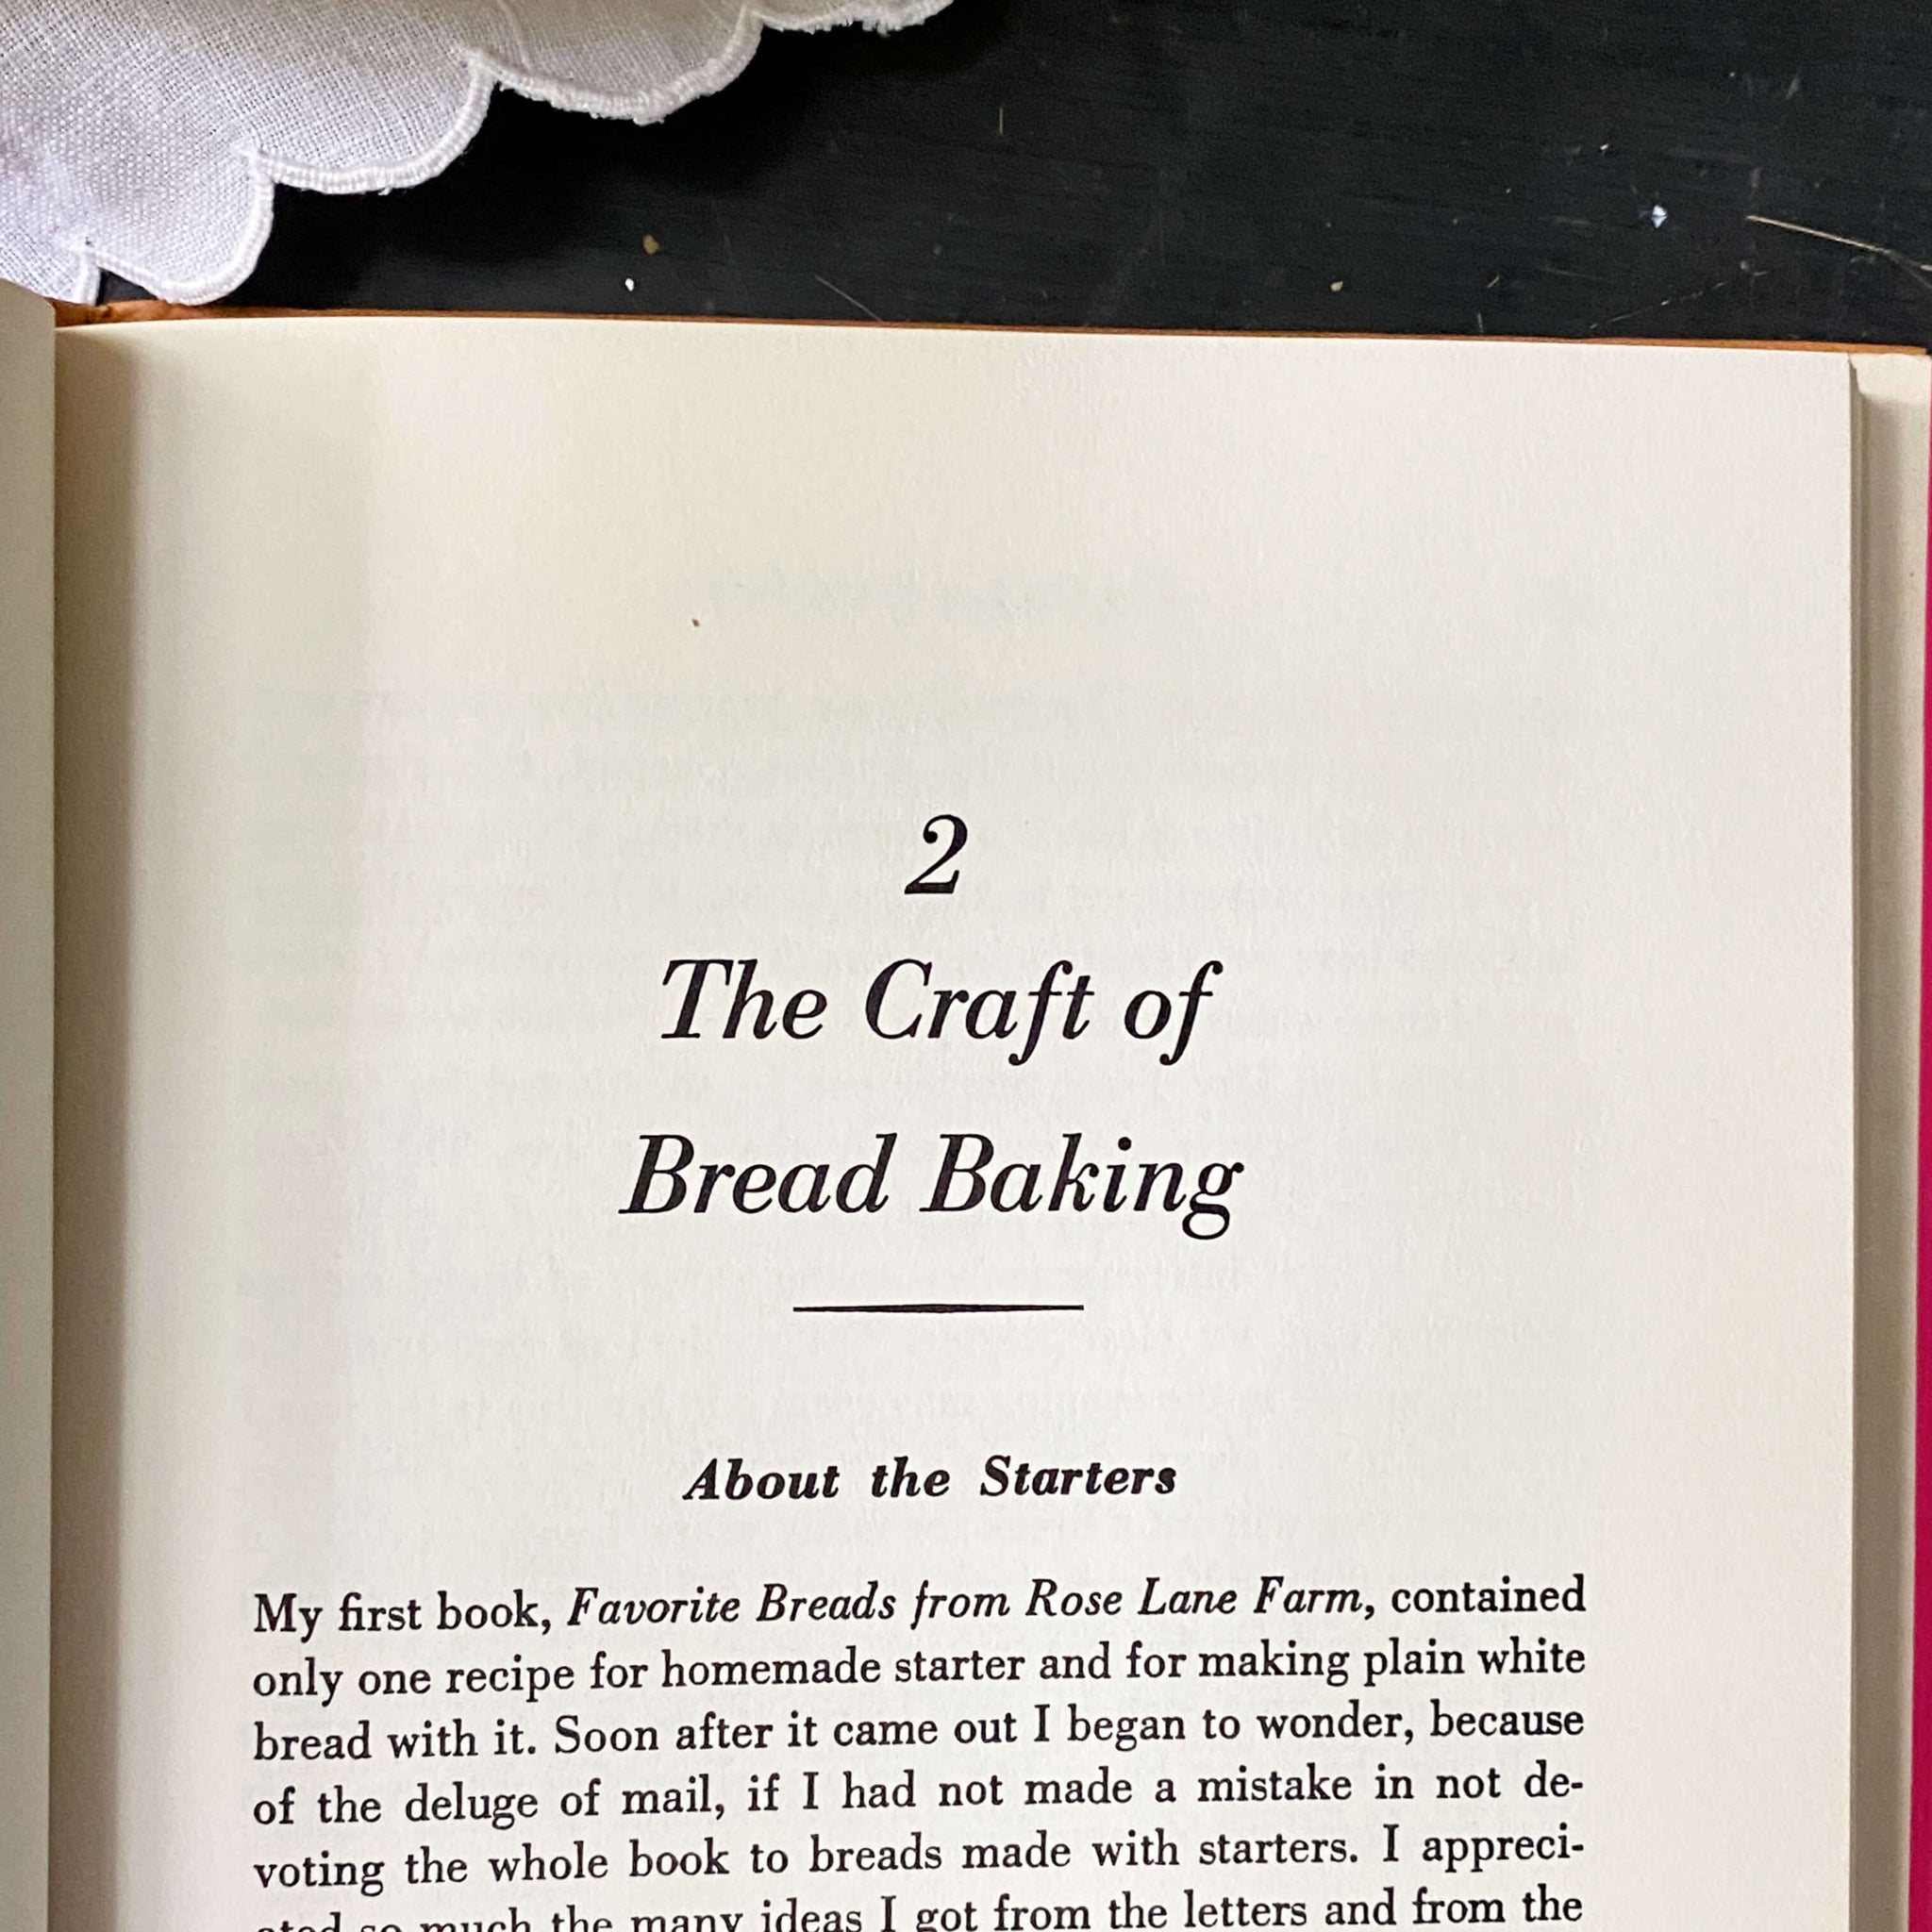 Breads and Coffee Cakes with Homemade Starters from Rose Lane Farm - Ada Lou Roberts - 1967 Book Club Edition